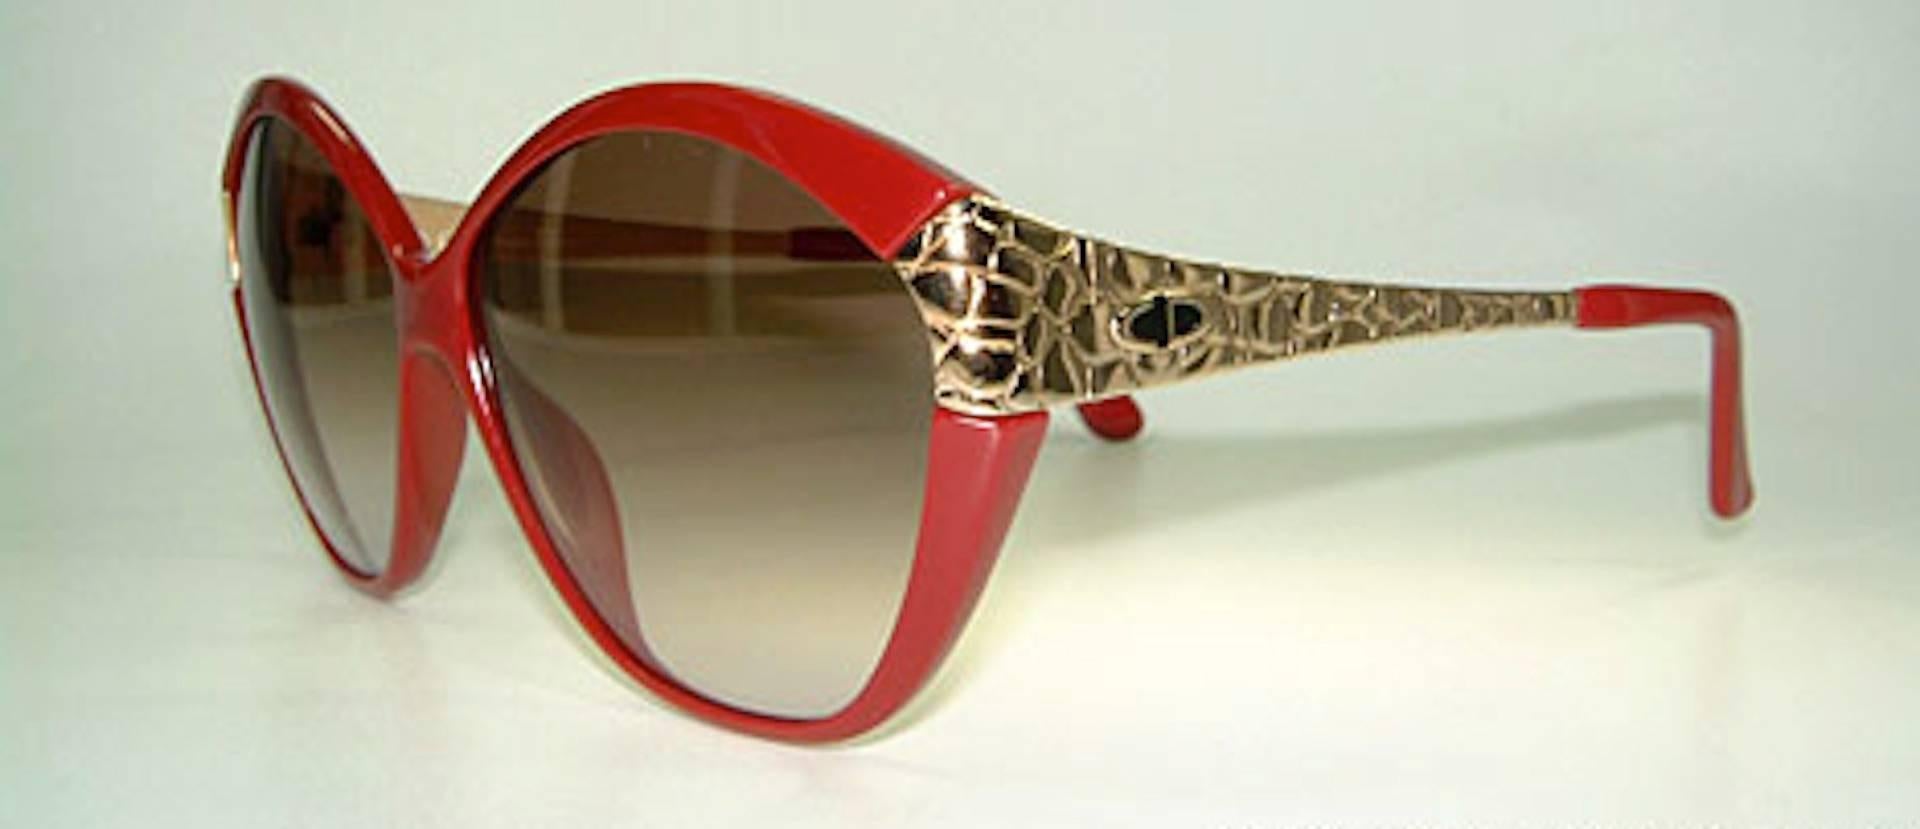 Oversized vintage designer sunglasses
Dark red & faux croc gold temples design
Top-quality, with new UV/UVA lenses

Dimensions	temple length: 130mm (5.12 inches)
vertical height: 60mm (2.36 inches)
horizontal width: 140mm (5.51